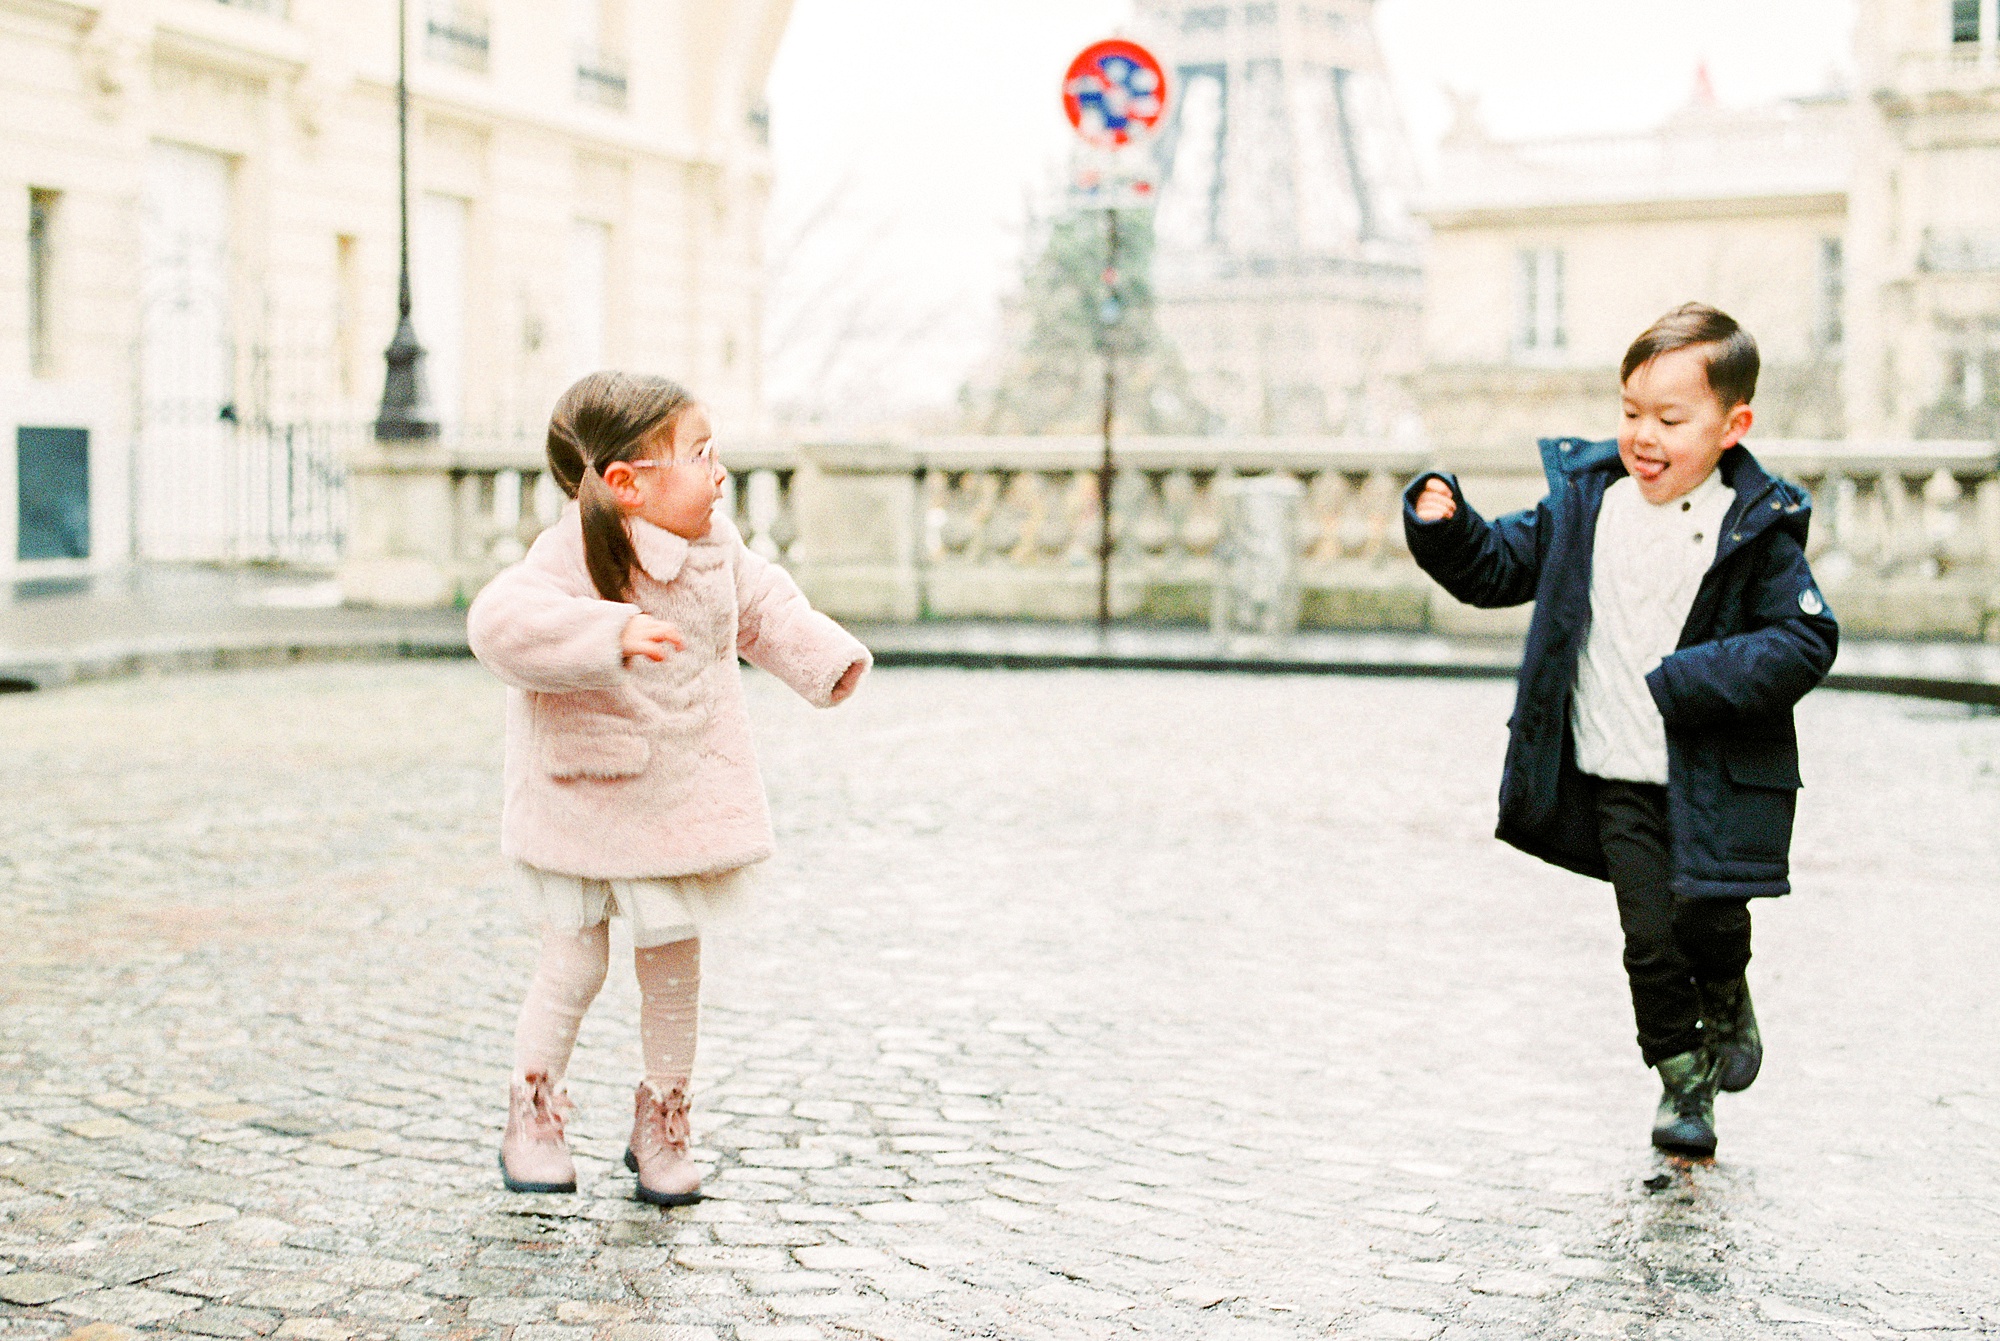 Two young children jumping at the Eiffel Tower